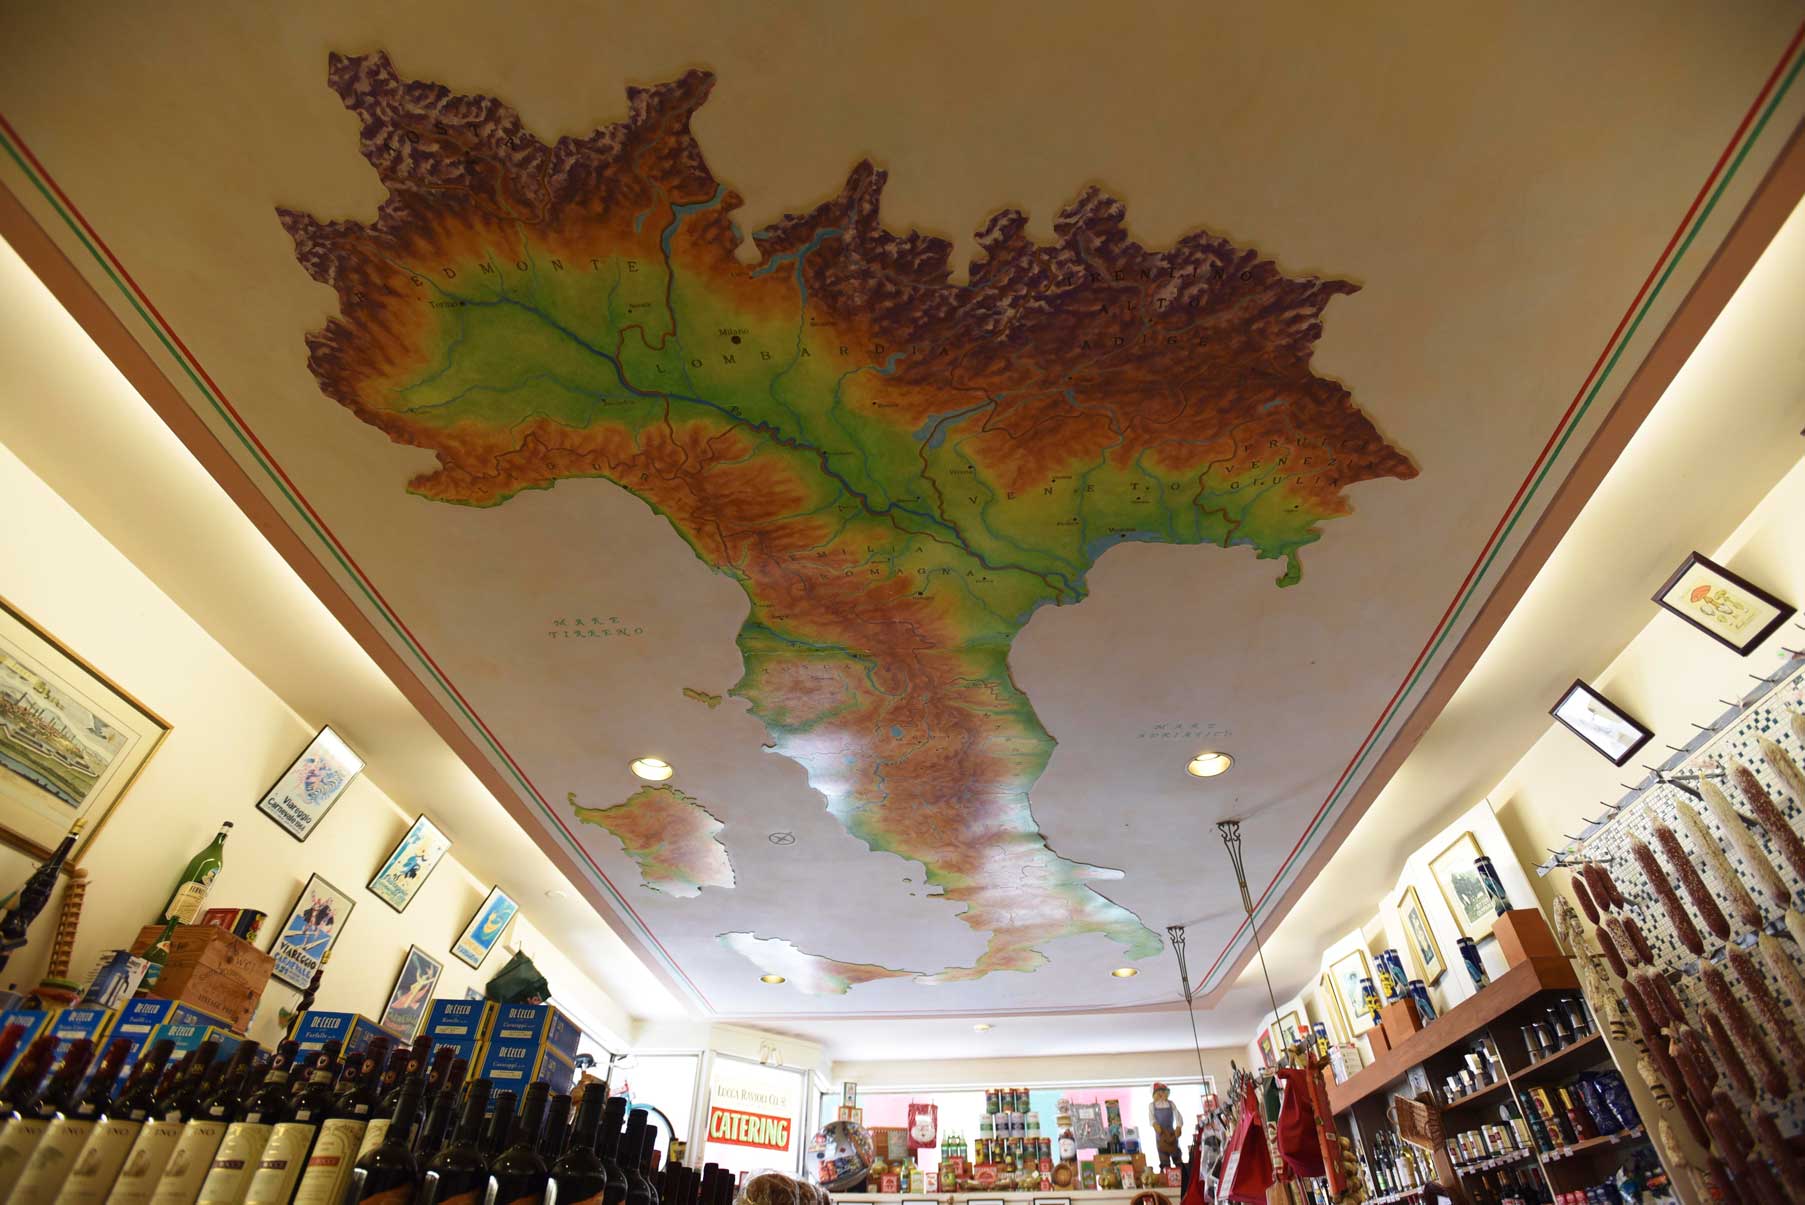 The mural on the ceiling shows off Italy's terrain